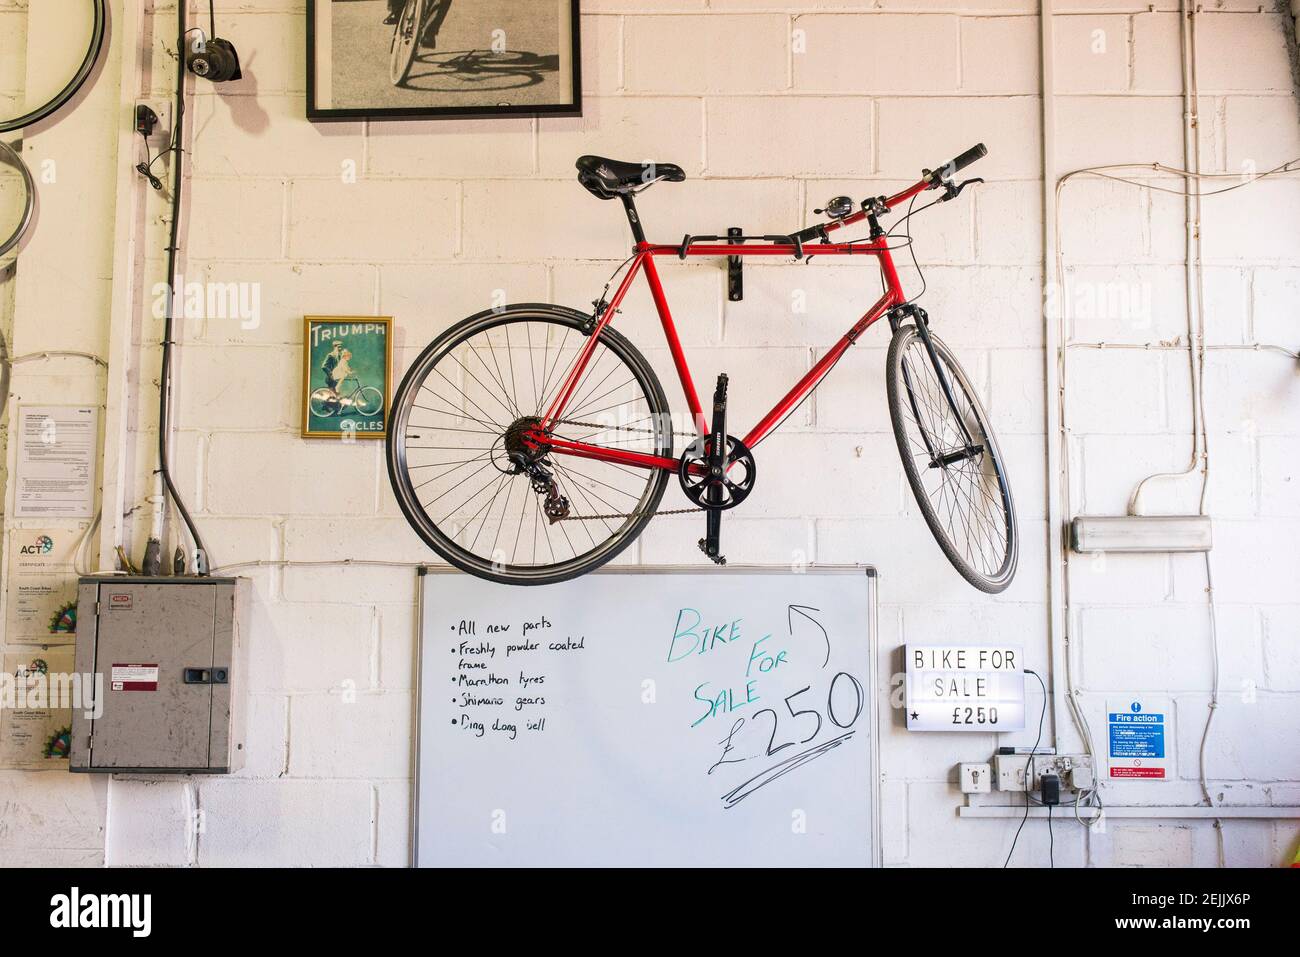 A cool bike hanging for storage. Stock Photo